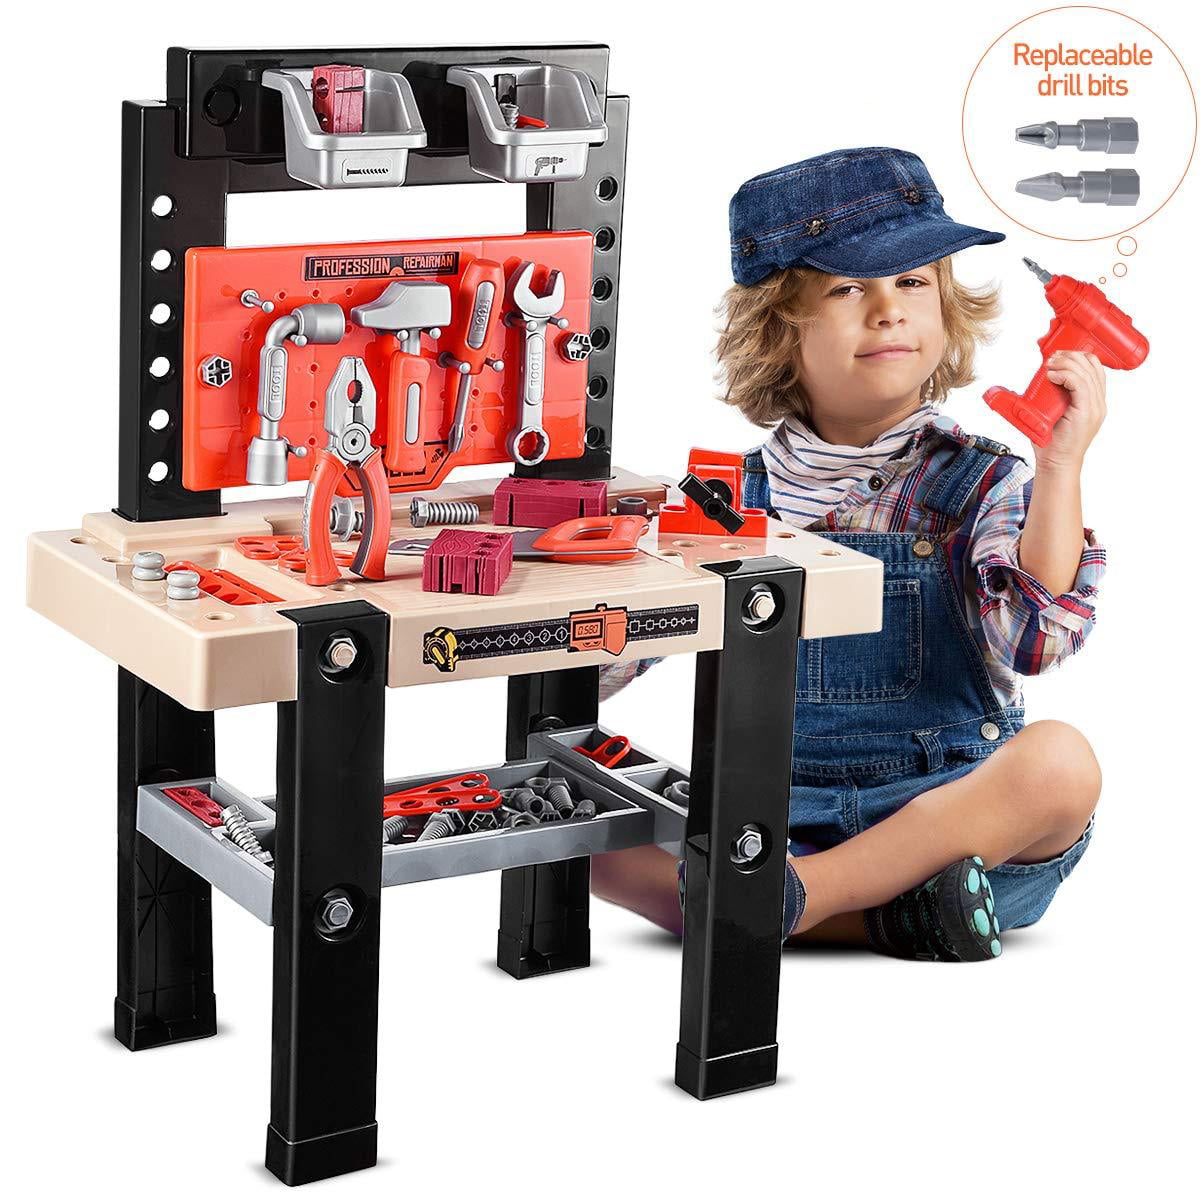 Details about  / Wooden Power Tool Workshop for Toddlers Building Tools Sets Pretend Play Toys